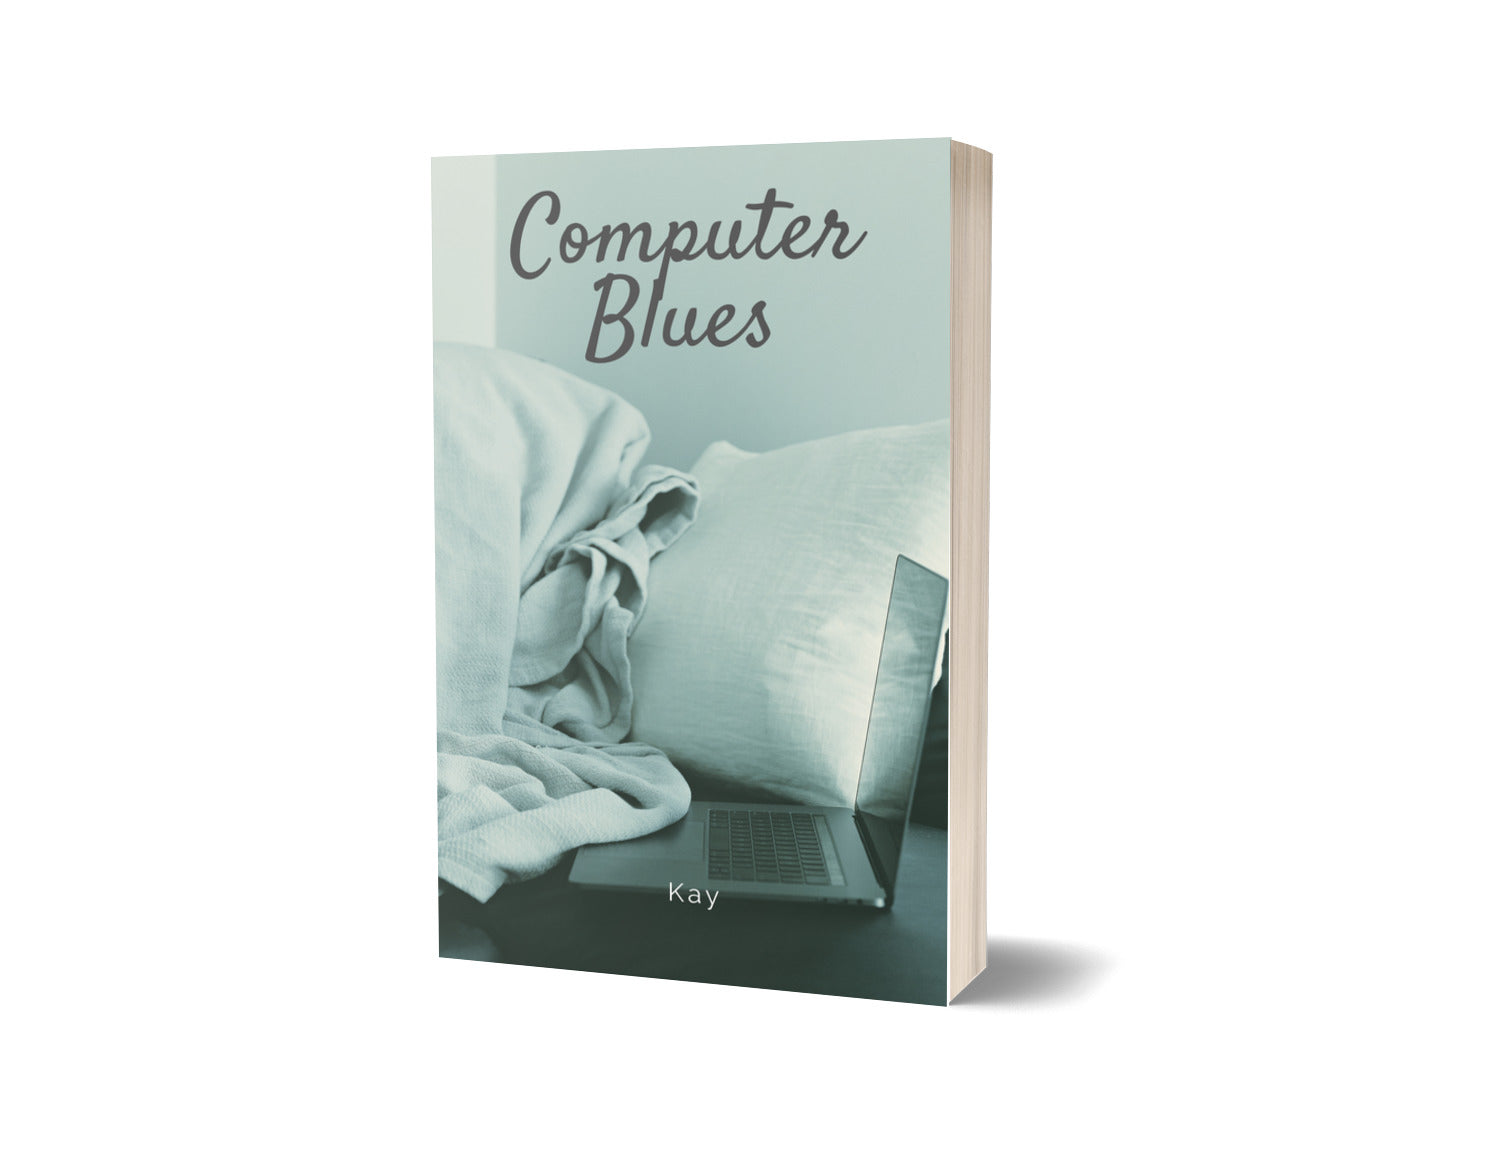 Computer Blues - A Short Story by Kay